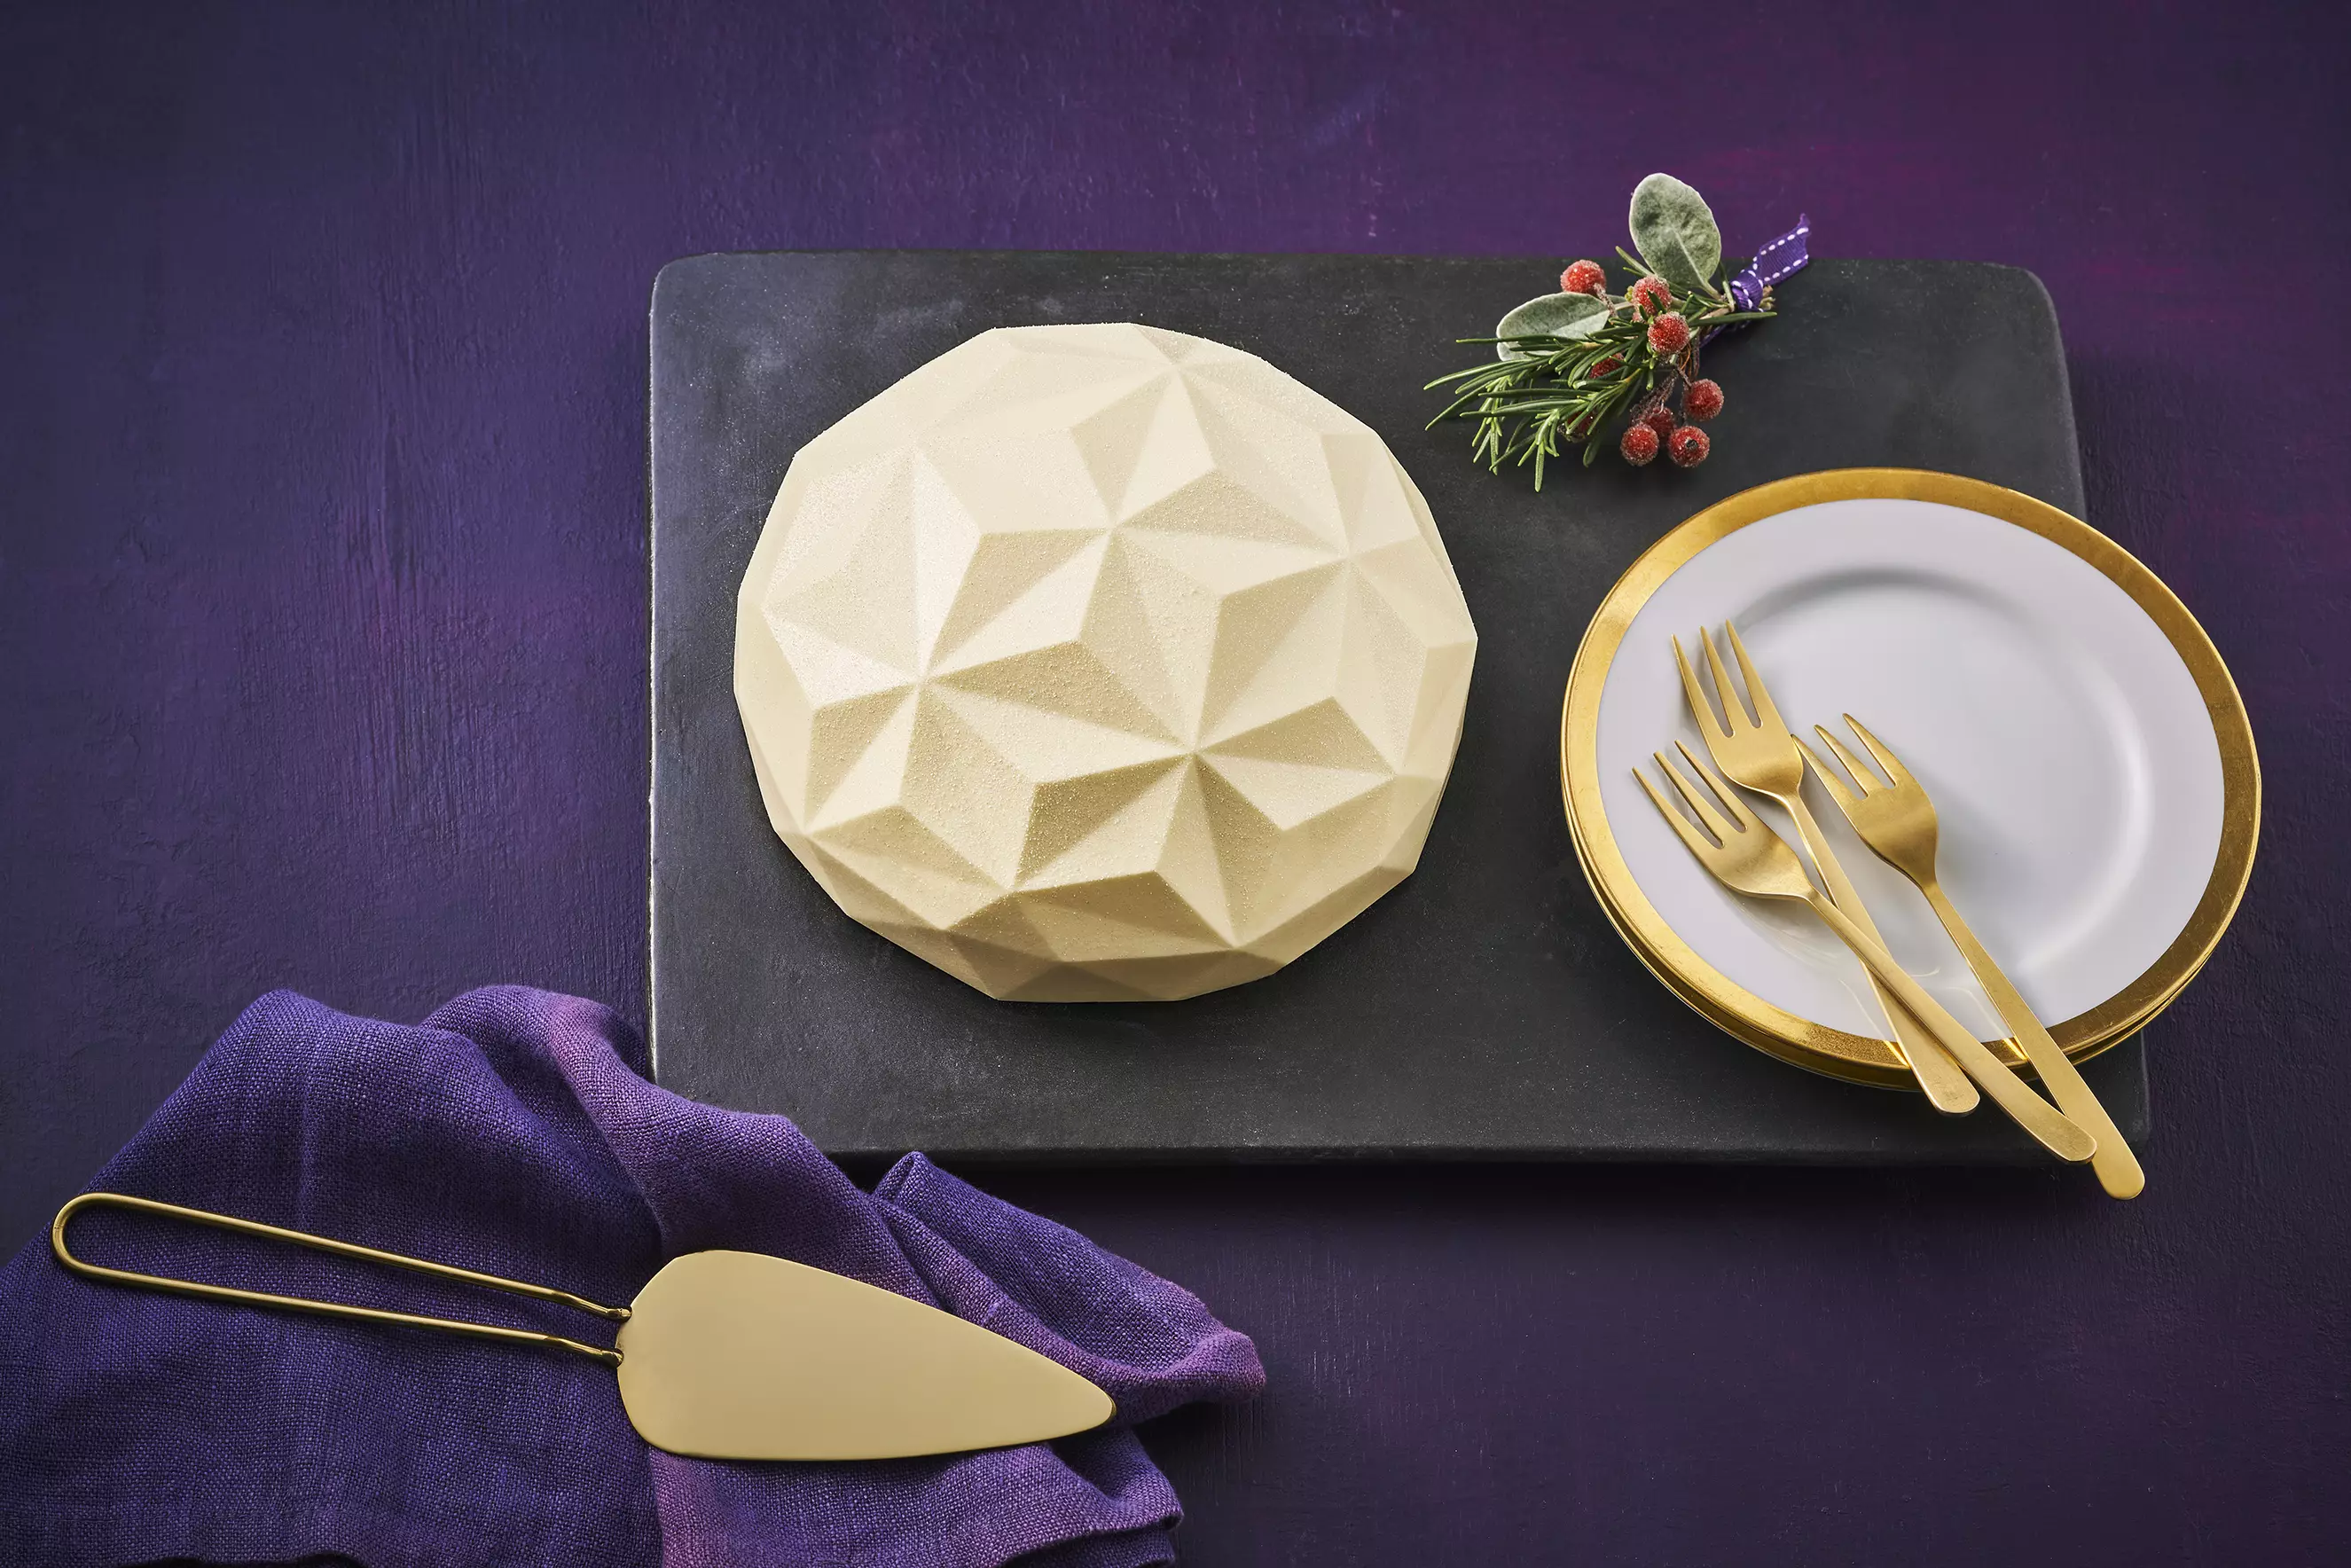 This drool-inducing snow dome dessert says it serves 12 and costs £12.